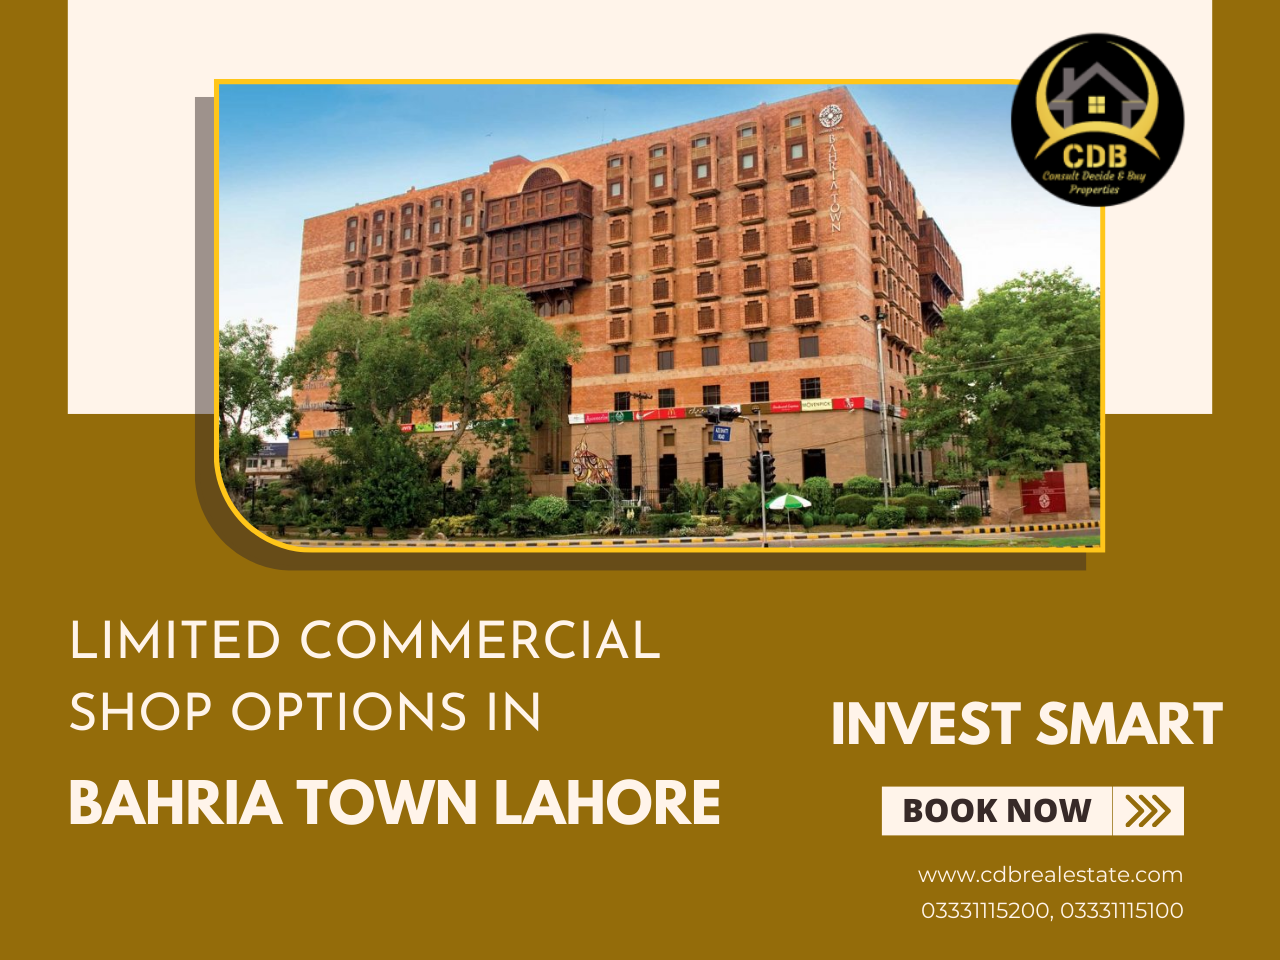 Limited Commercial Shop Options in Bahria Town Lahore